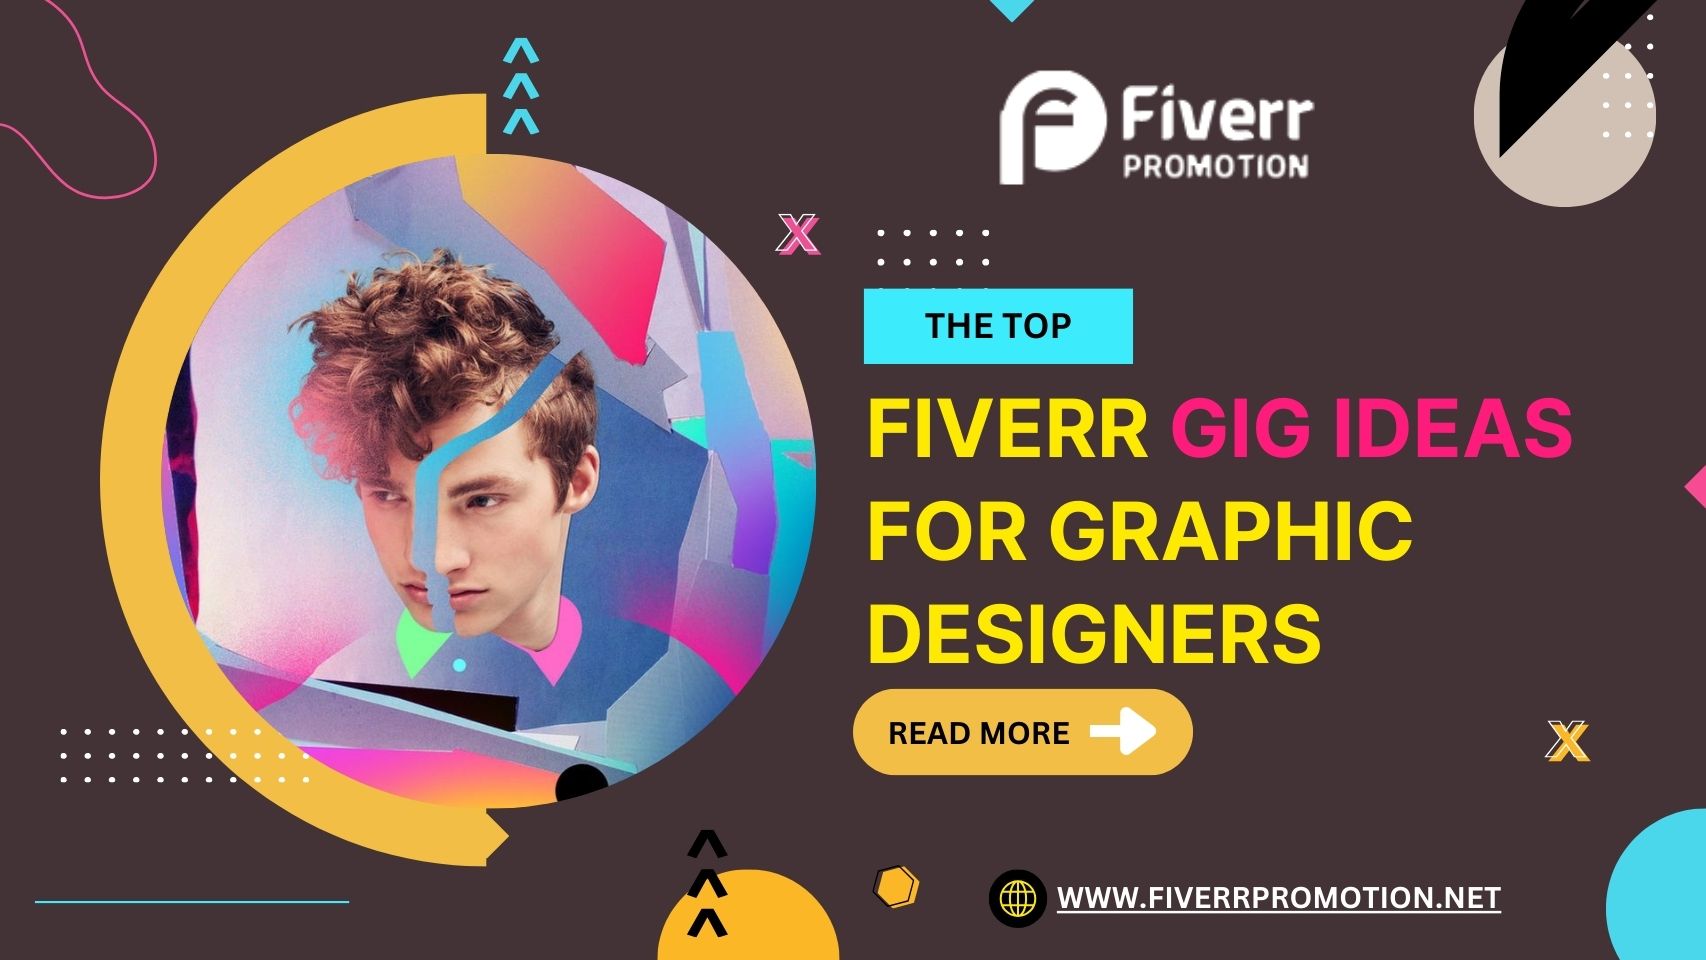 The top Fiverr gig ideas for graphic designers